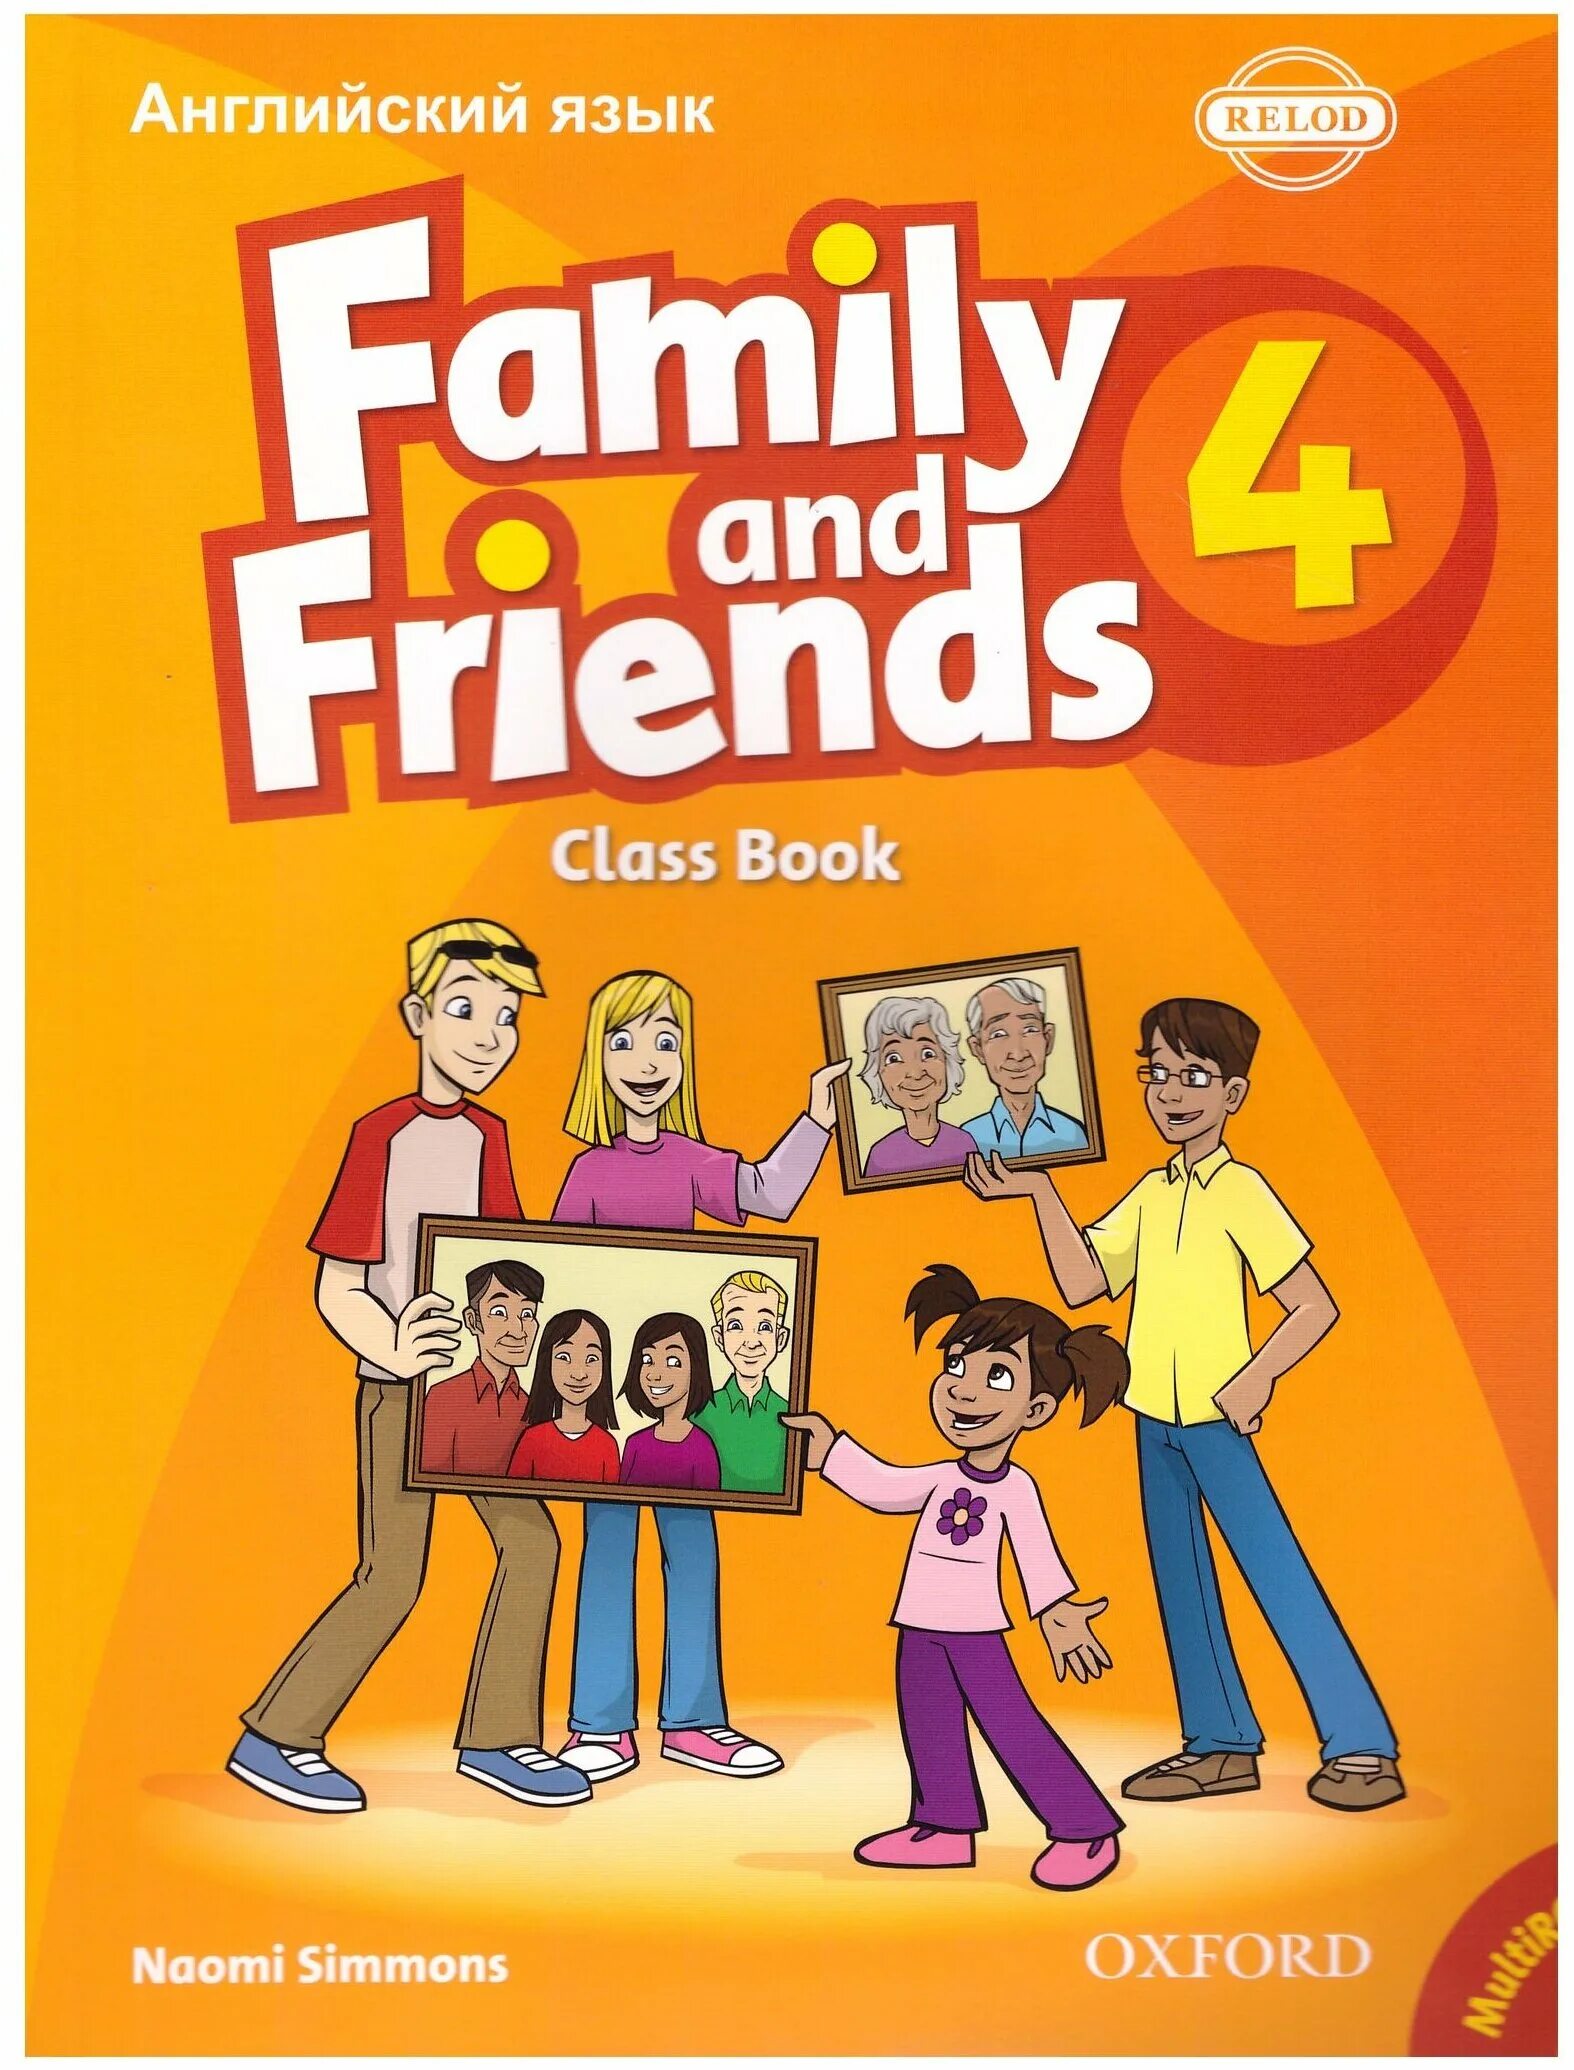 Books my family. 4 Класс Family and friends 2 Classbook Workbook. Учебник по английскому языку Family and friends 4. Английский язык Family and friends class book 2. Учебник по английскому языку Family and friends 1.